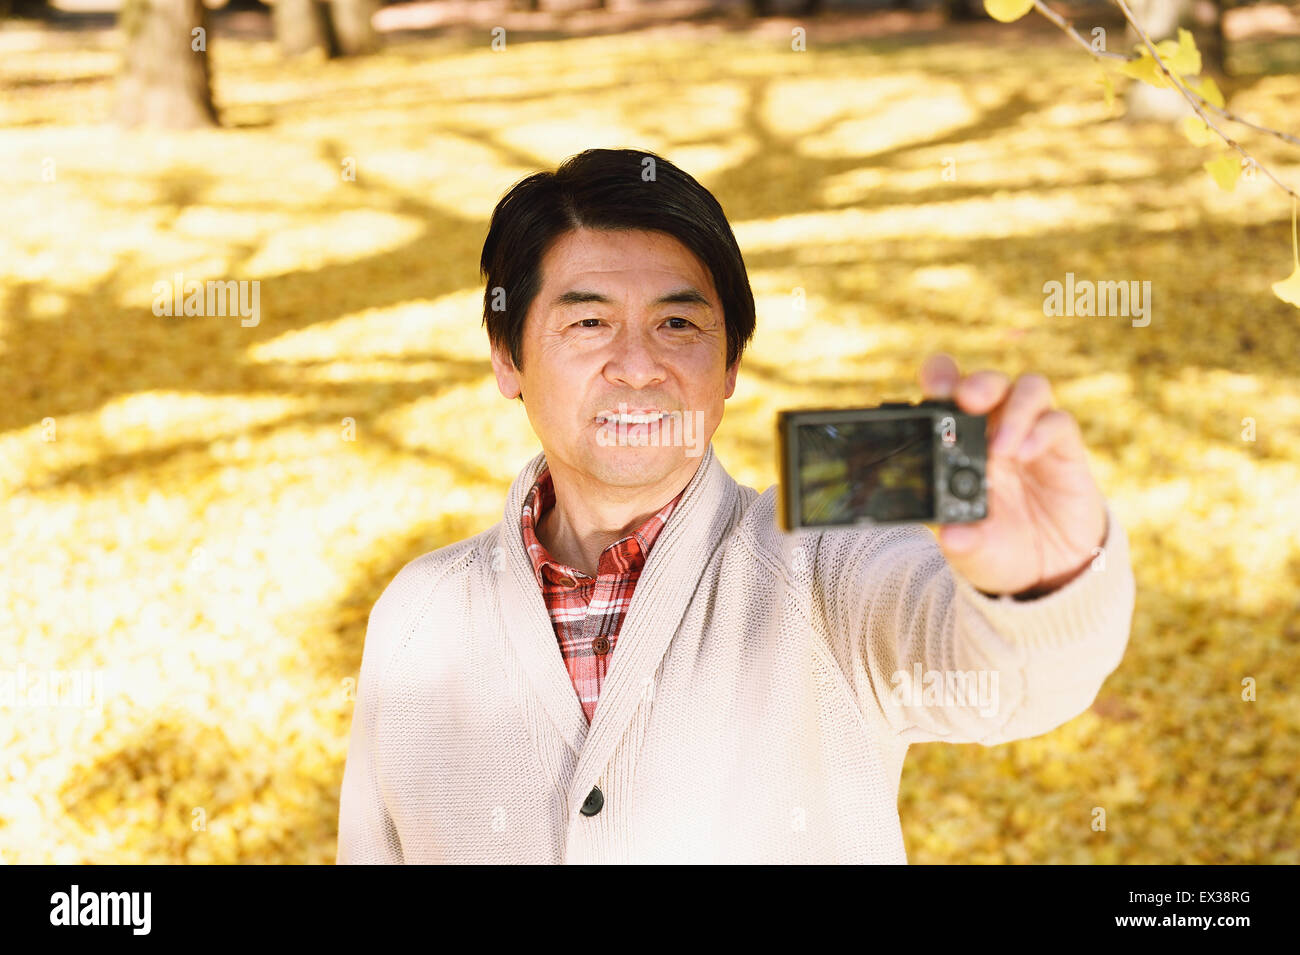 Senior Japanese man taking a selfie in a city park in Autumn Stock Photo